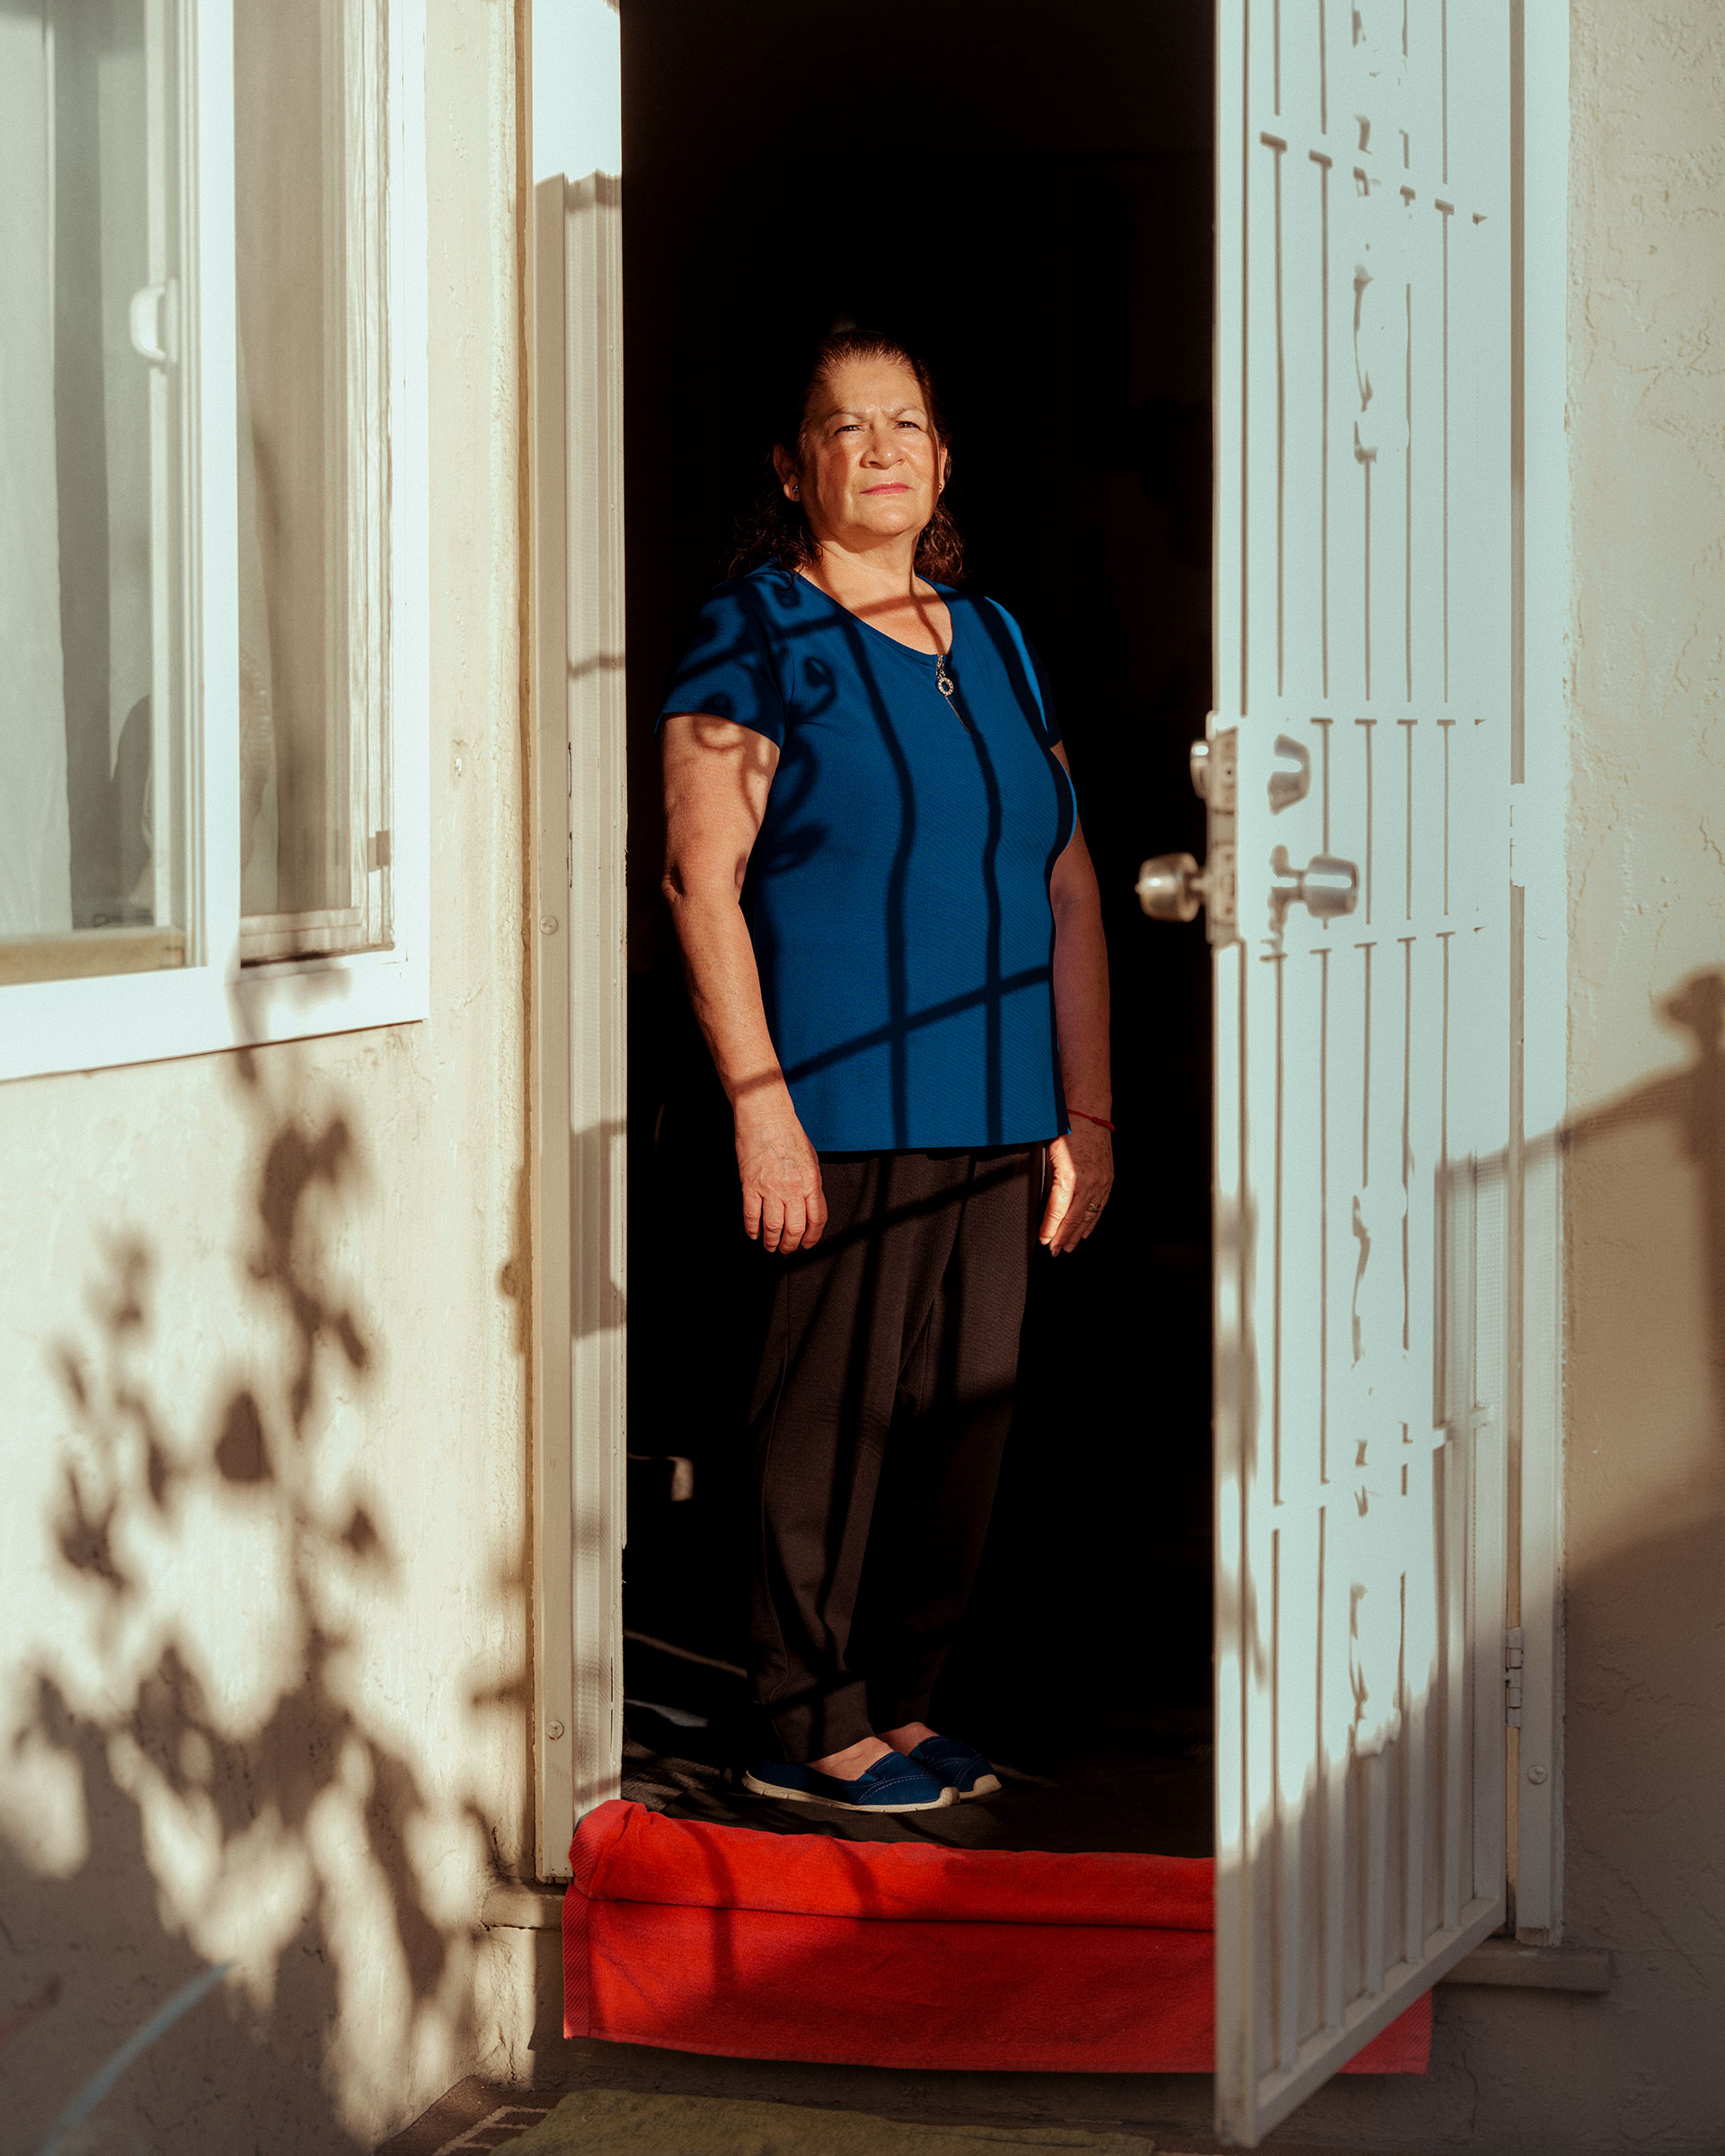 <strong>Maricela Betancourt, 58, Janitor, San Jose, Calif.</strong> After decades of cleaning houses, Betancourt wanted a job with benefits, so she started working at Tesla. But her health insurance hadn’t kicked in when severe abdominal pain brought her to the ER, and then Tesla sent the janitors home without pay. The hospital bill keeps rising as her family struggles to pay it and other bills. (Mark Mahaney for TIME)